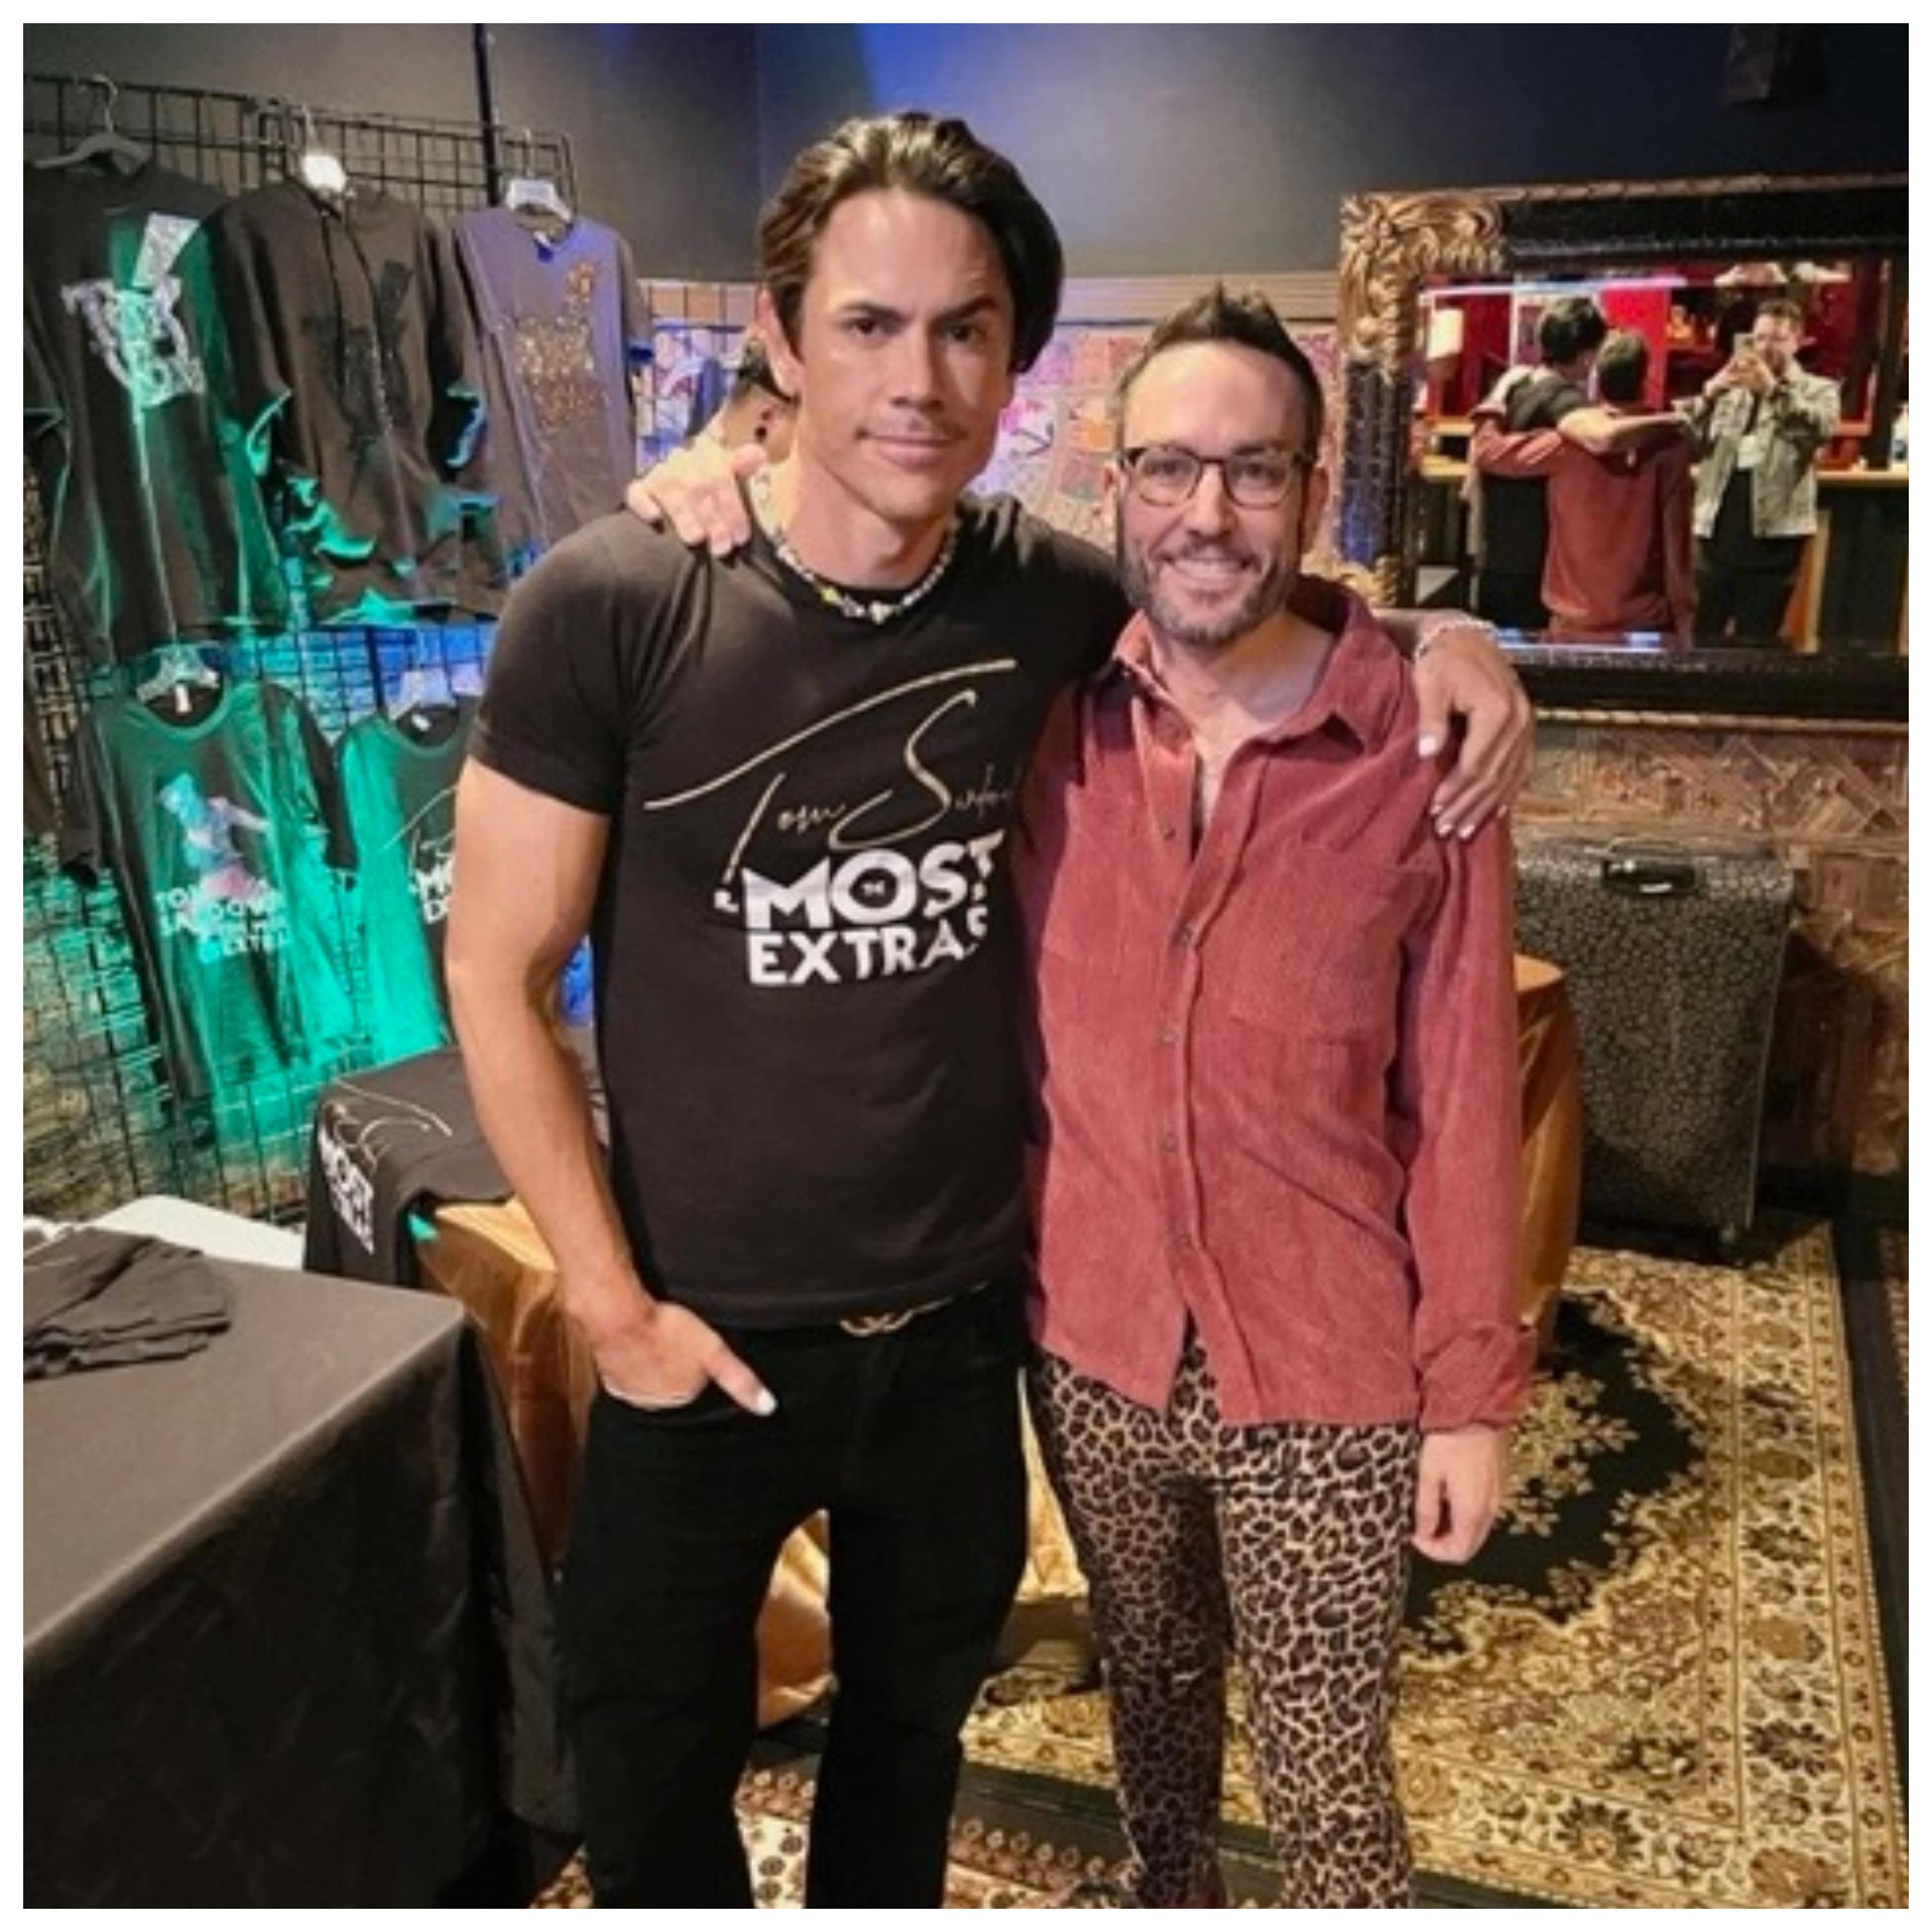 Tom Sandoval from 'Vanderpump Rules' poses for a photo with David Yontef